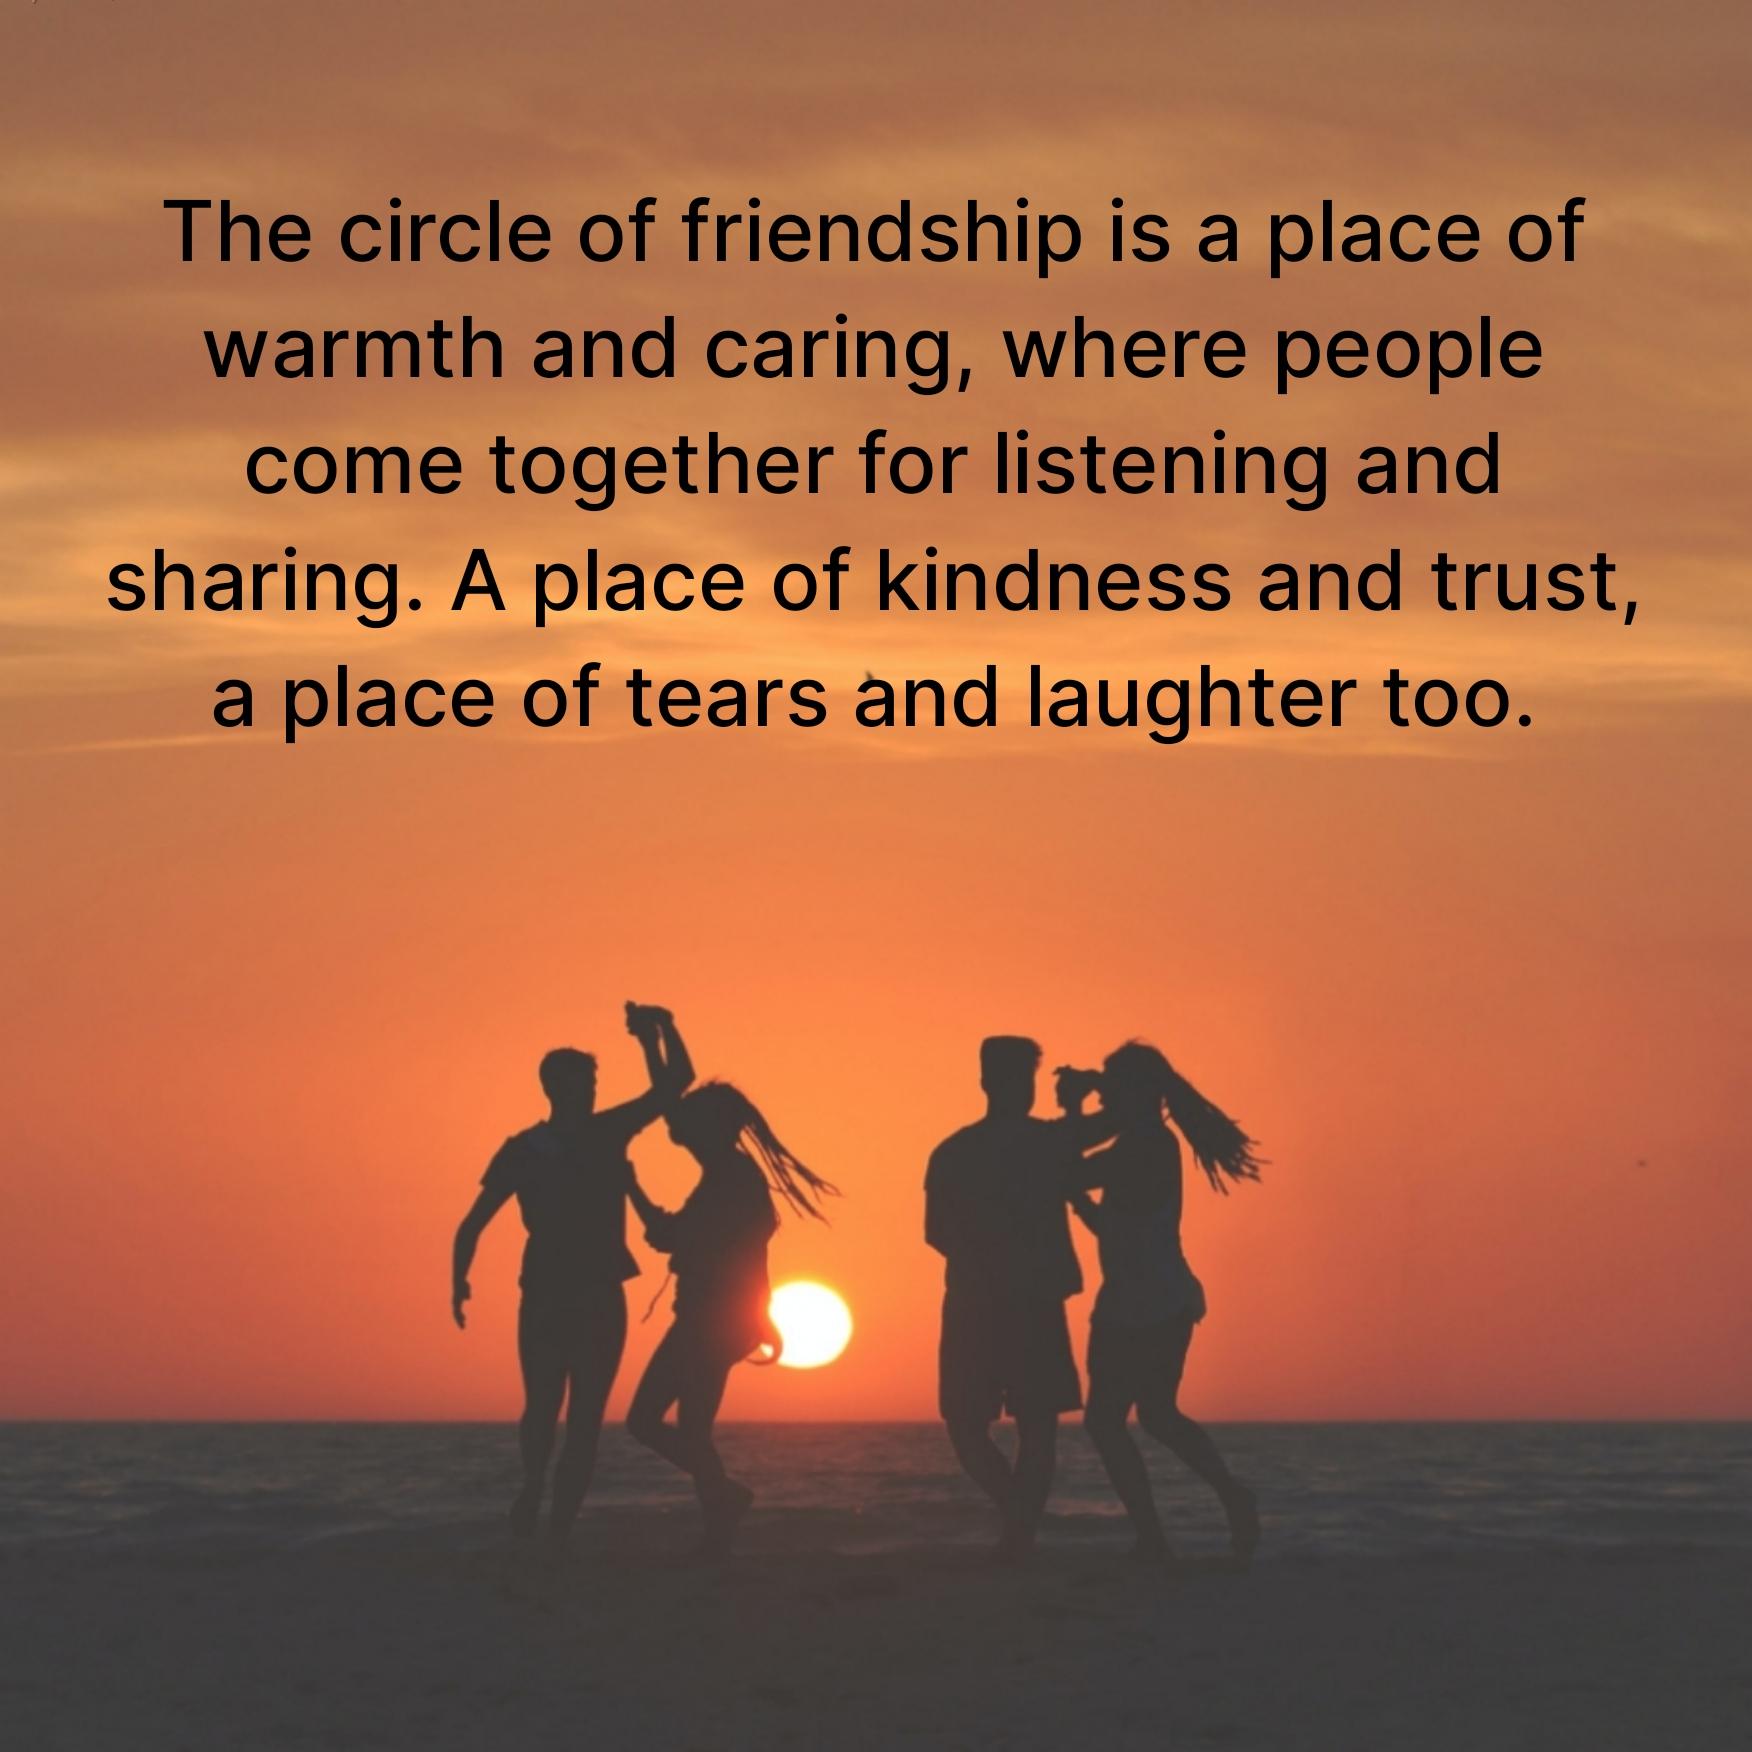 The circle of friendship is a place of warmth and caring